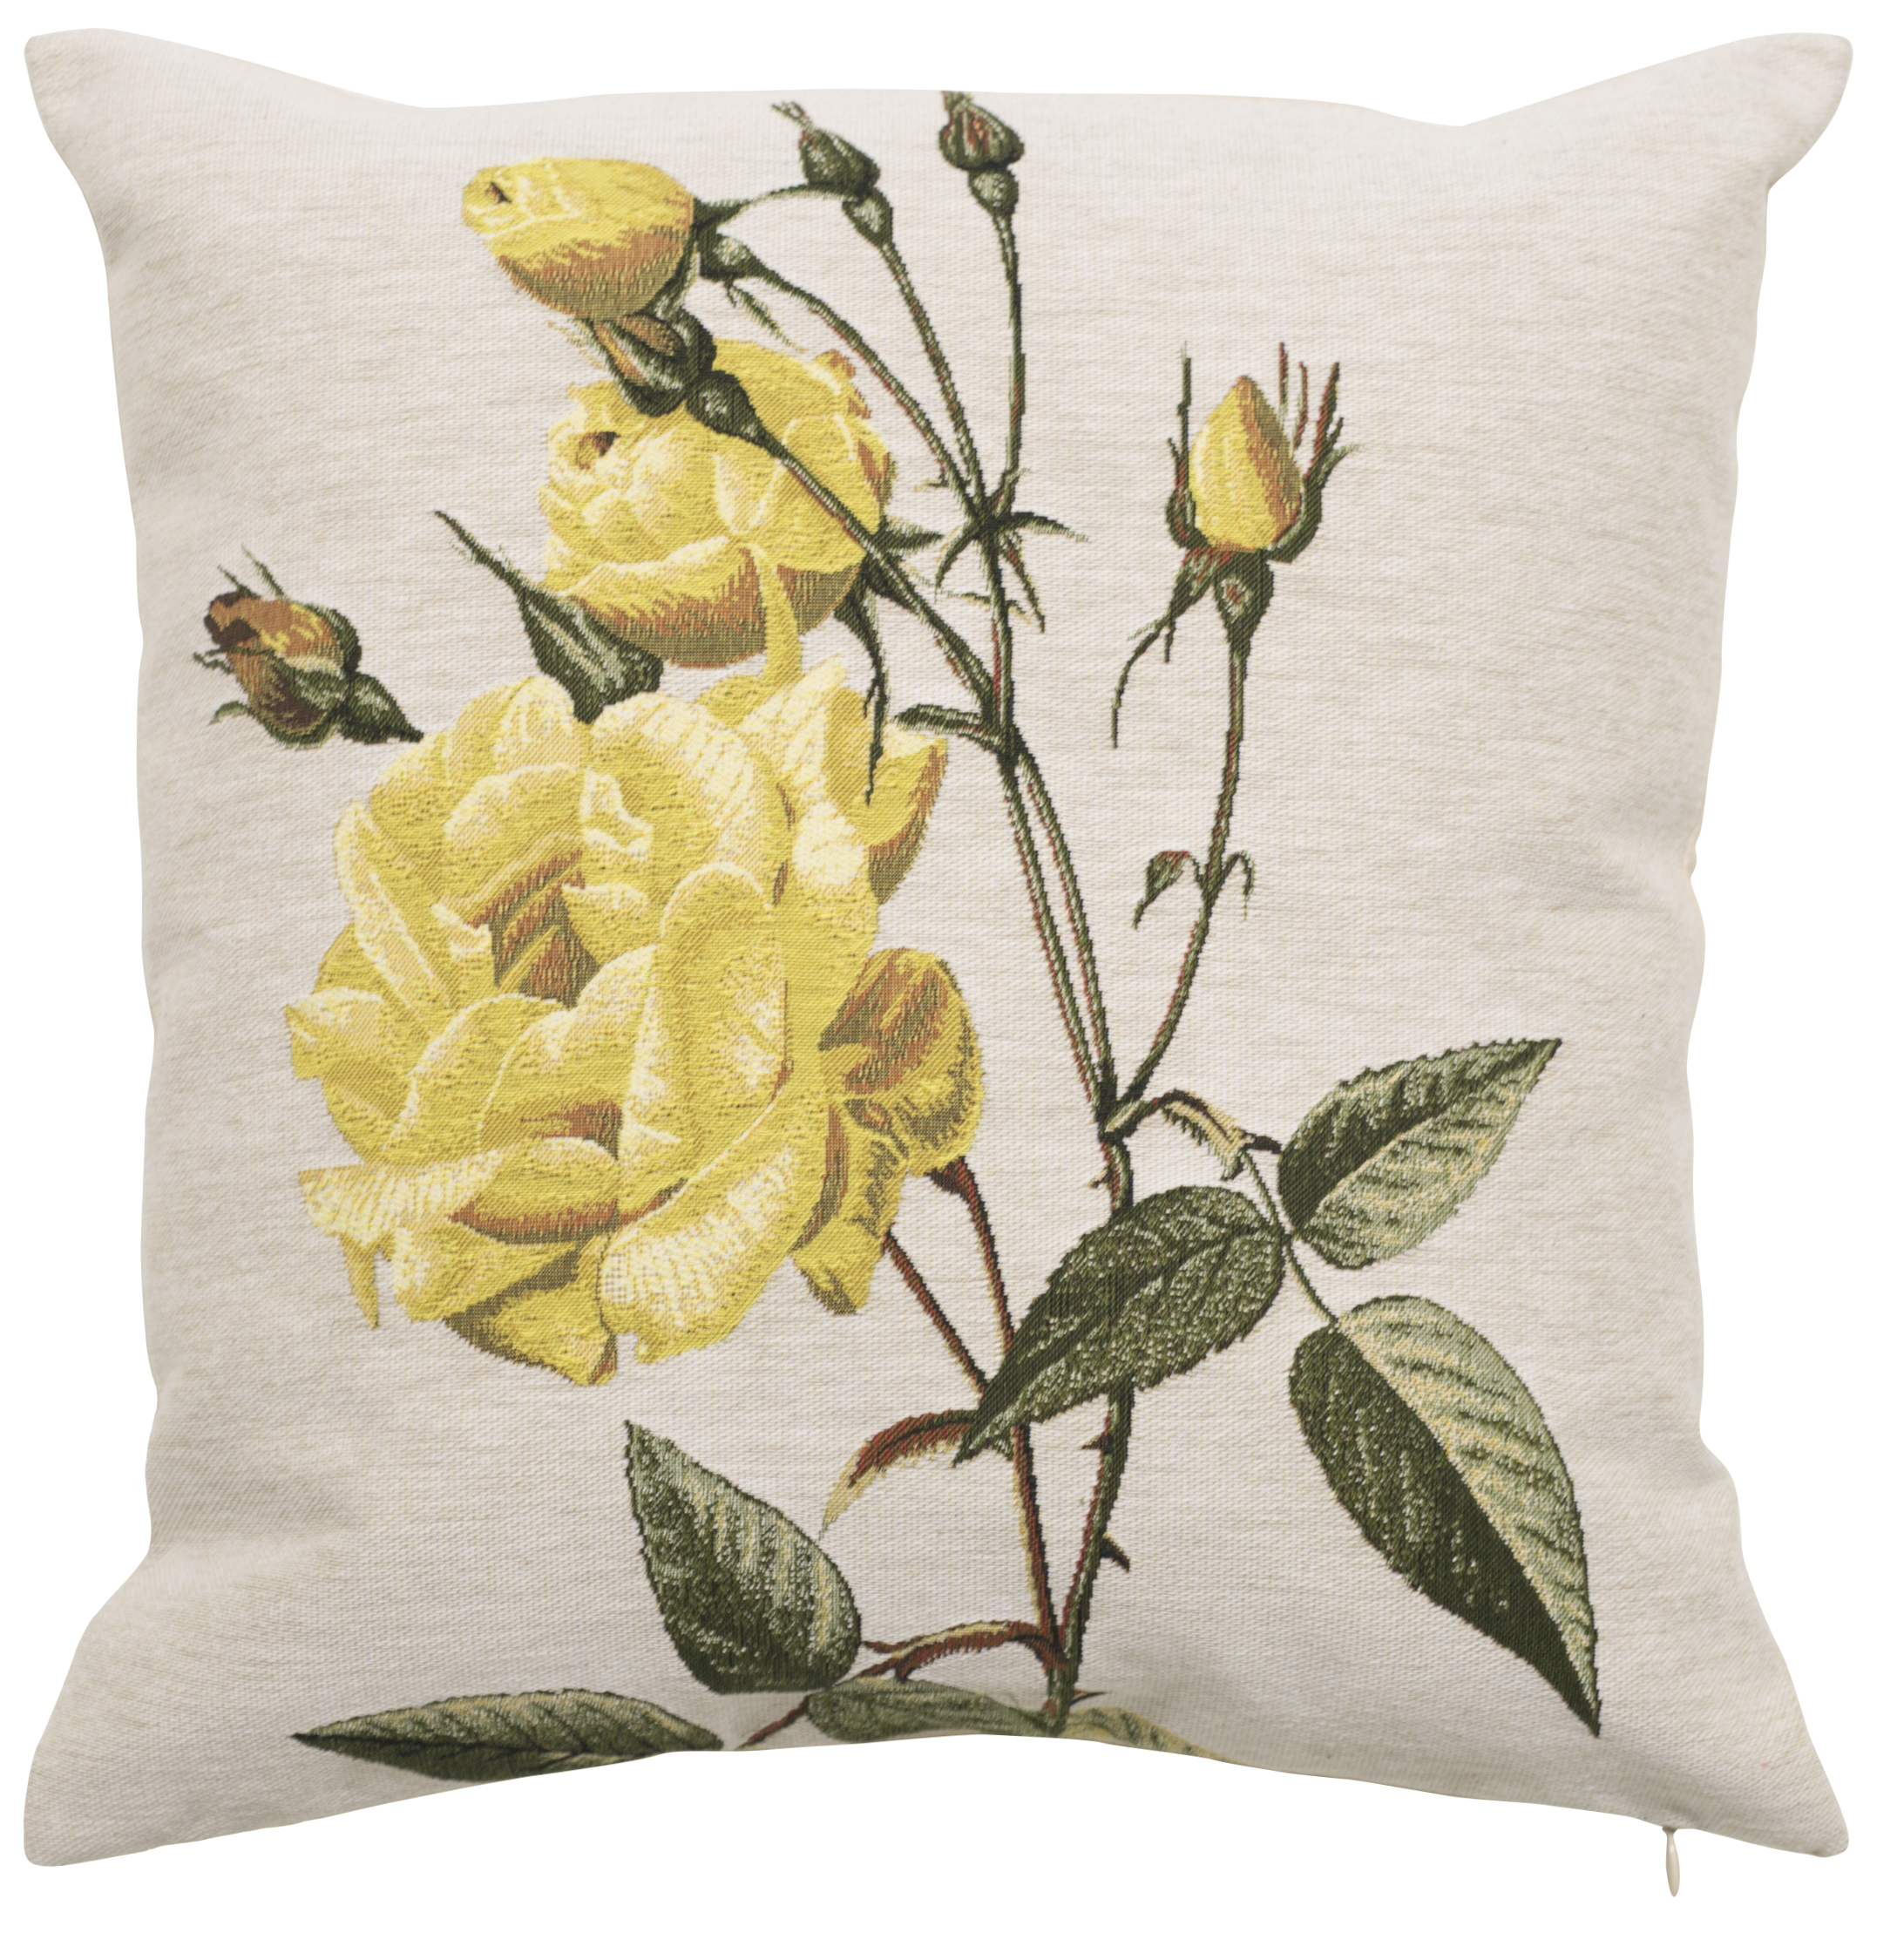 Pillow - Jane - Yellow in White Background